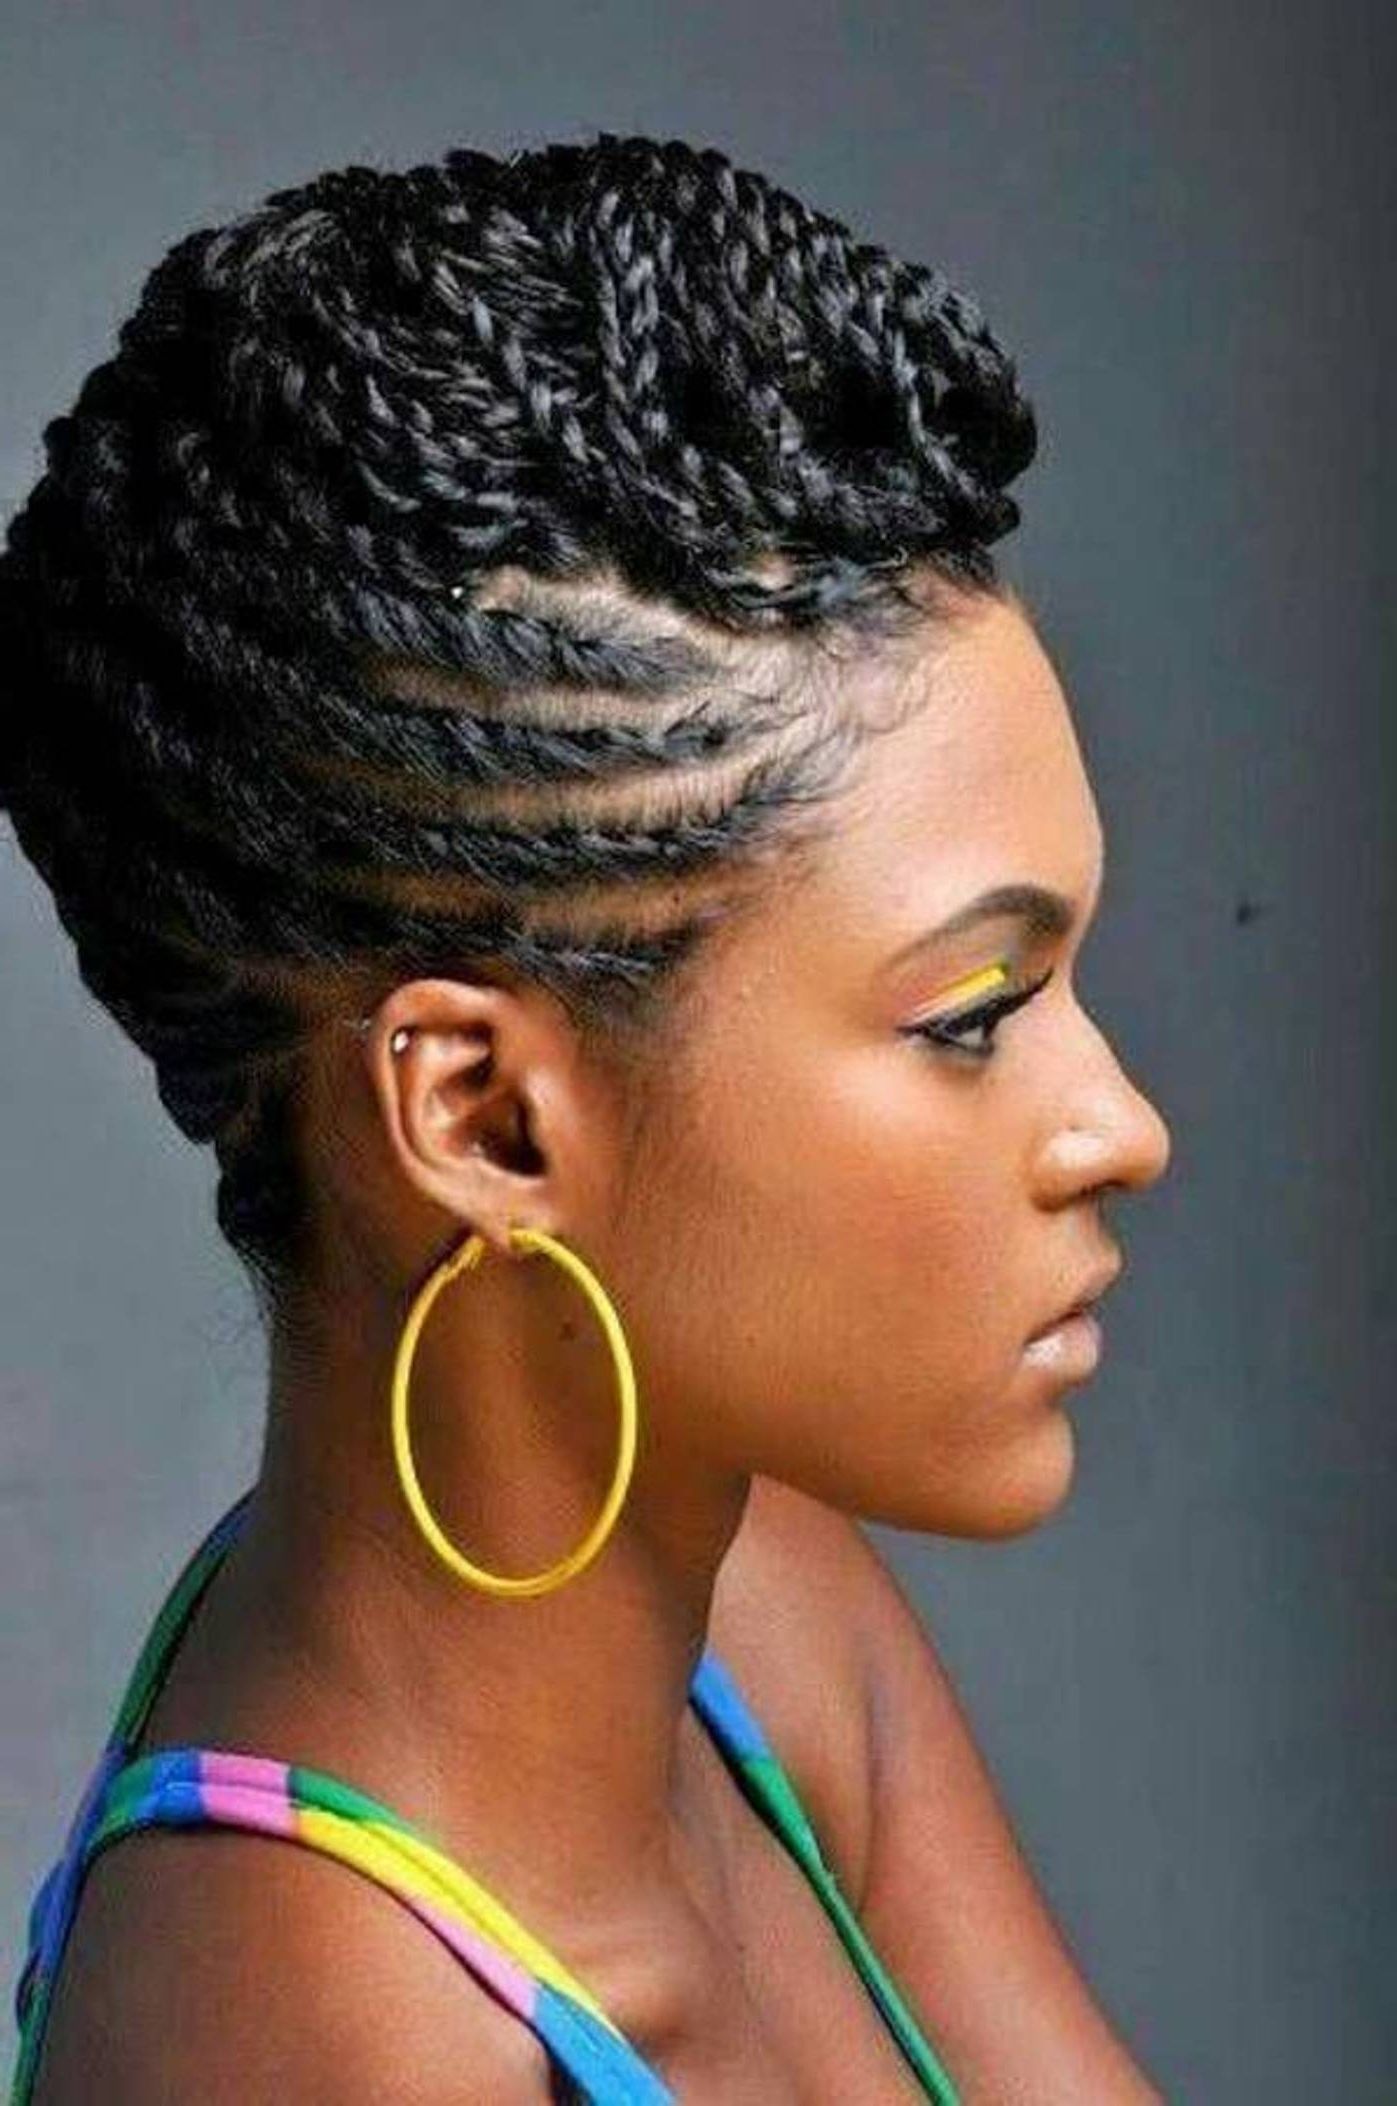 25 Updo Hairstyles For Black Women Pertaining To African Updo Hairstyles (View 1 of 15)